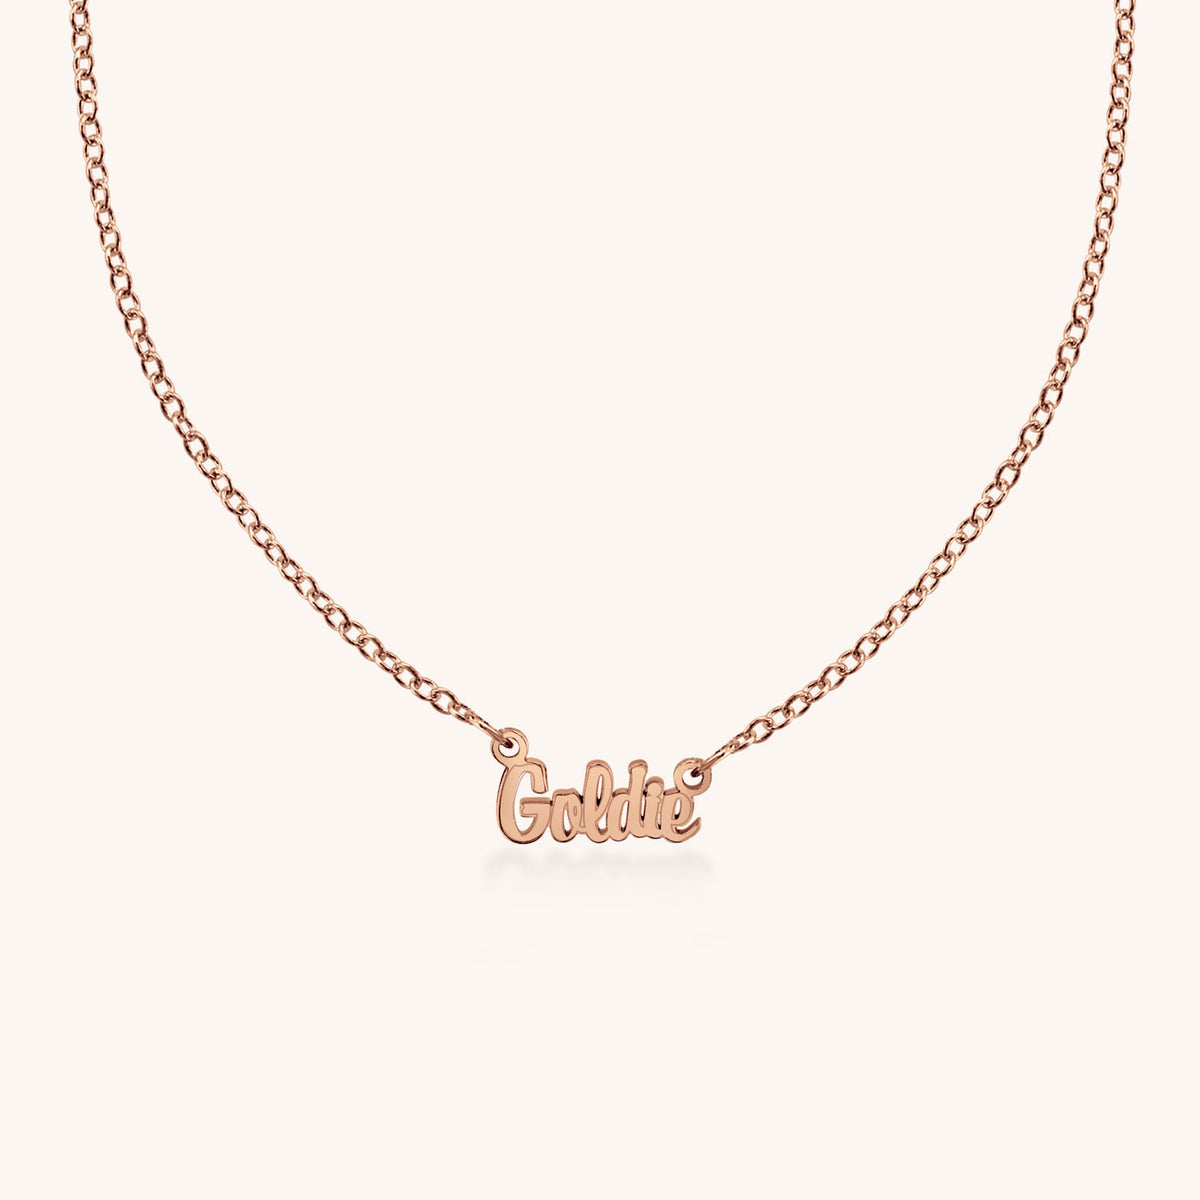 Goldie Nameplate Necklace